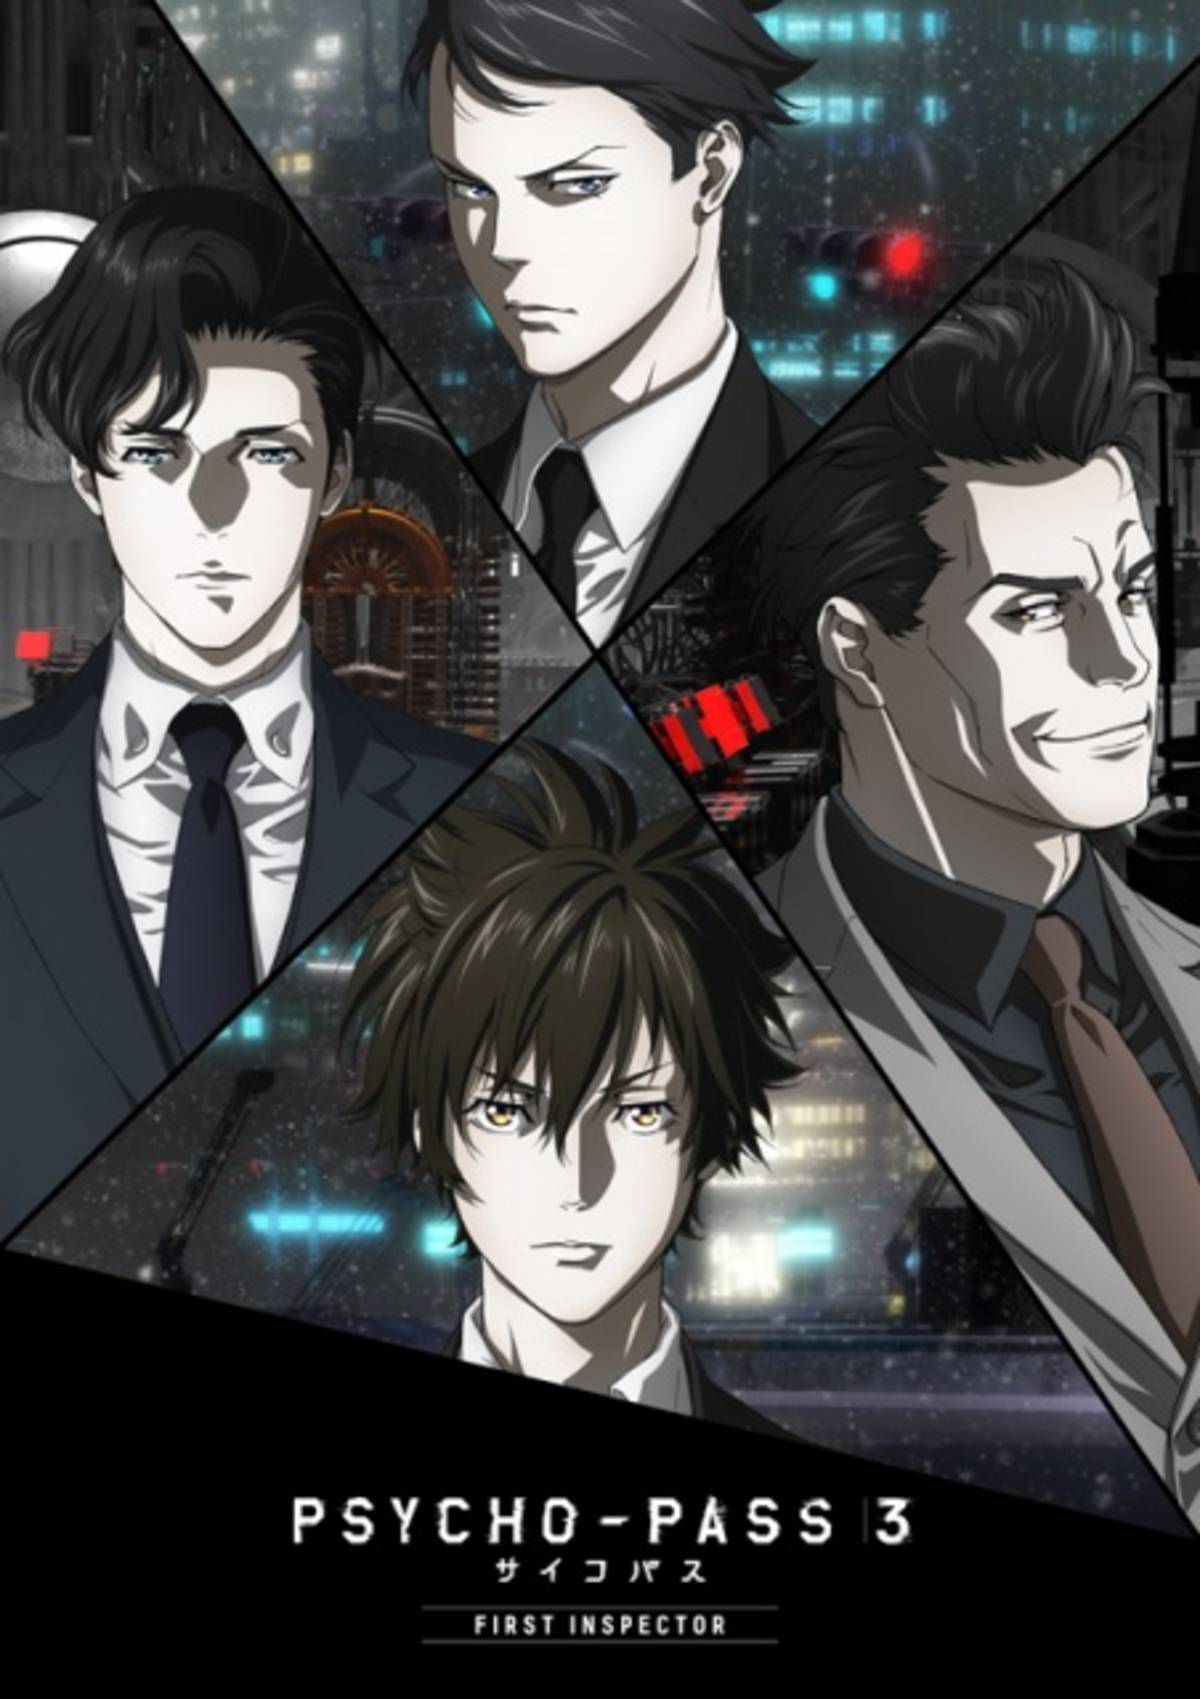 Psycho-Pass 3 review